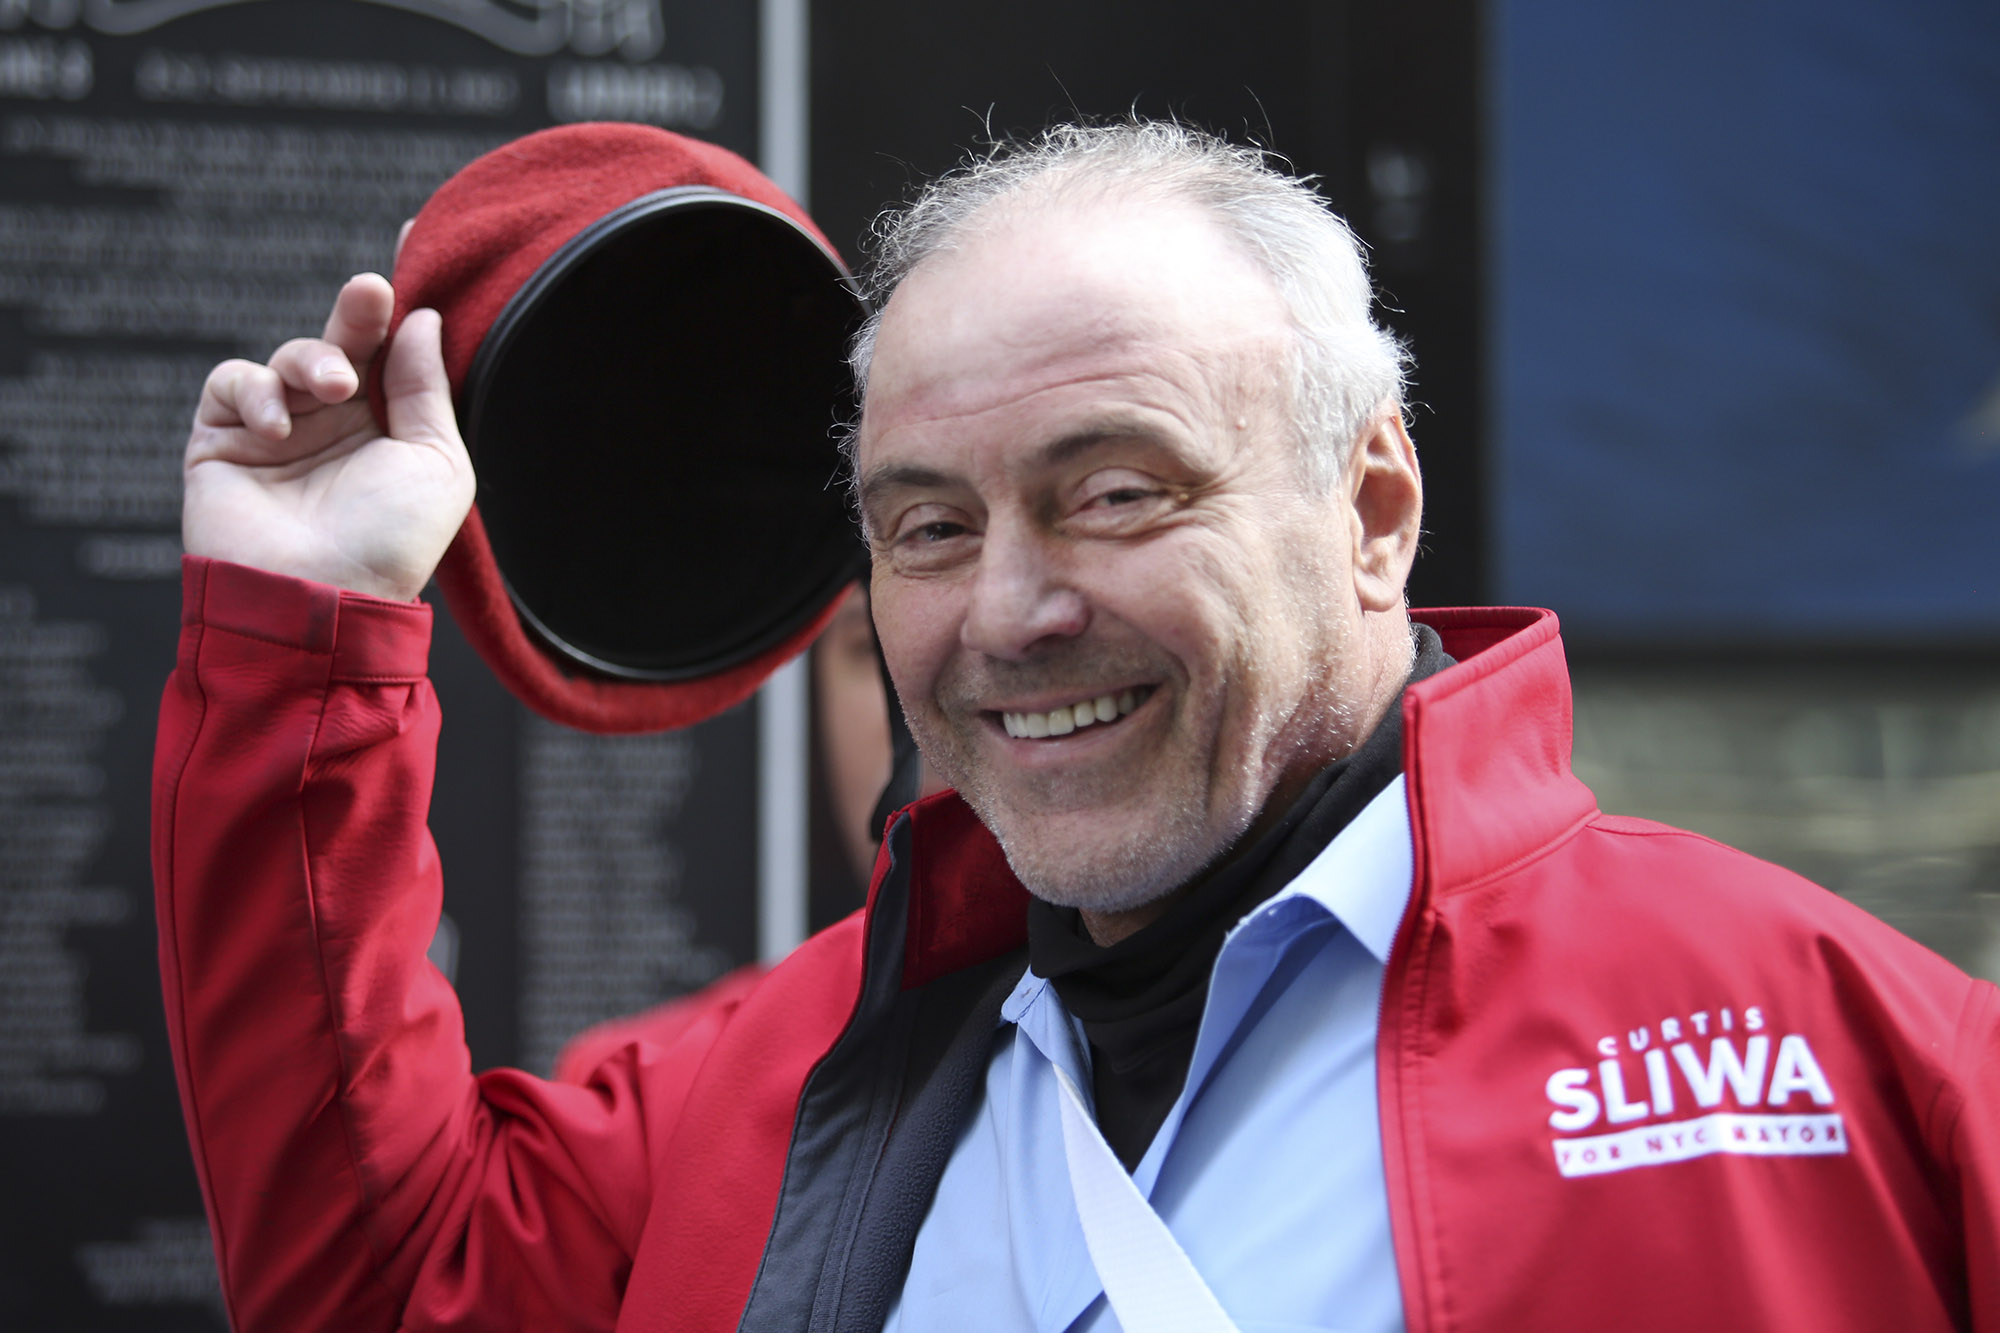 30-facts-about-curtis-sliwa